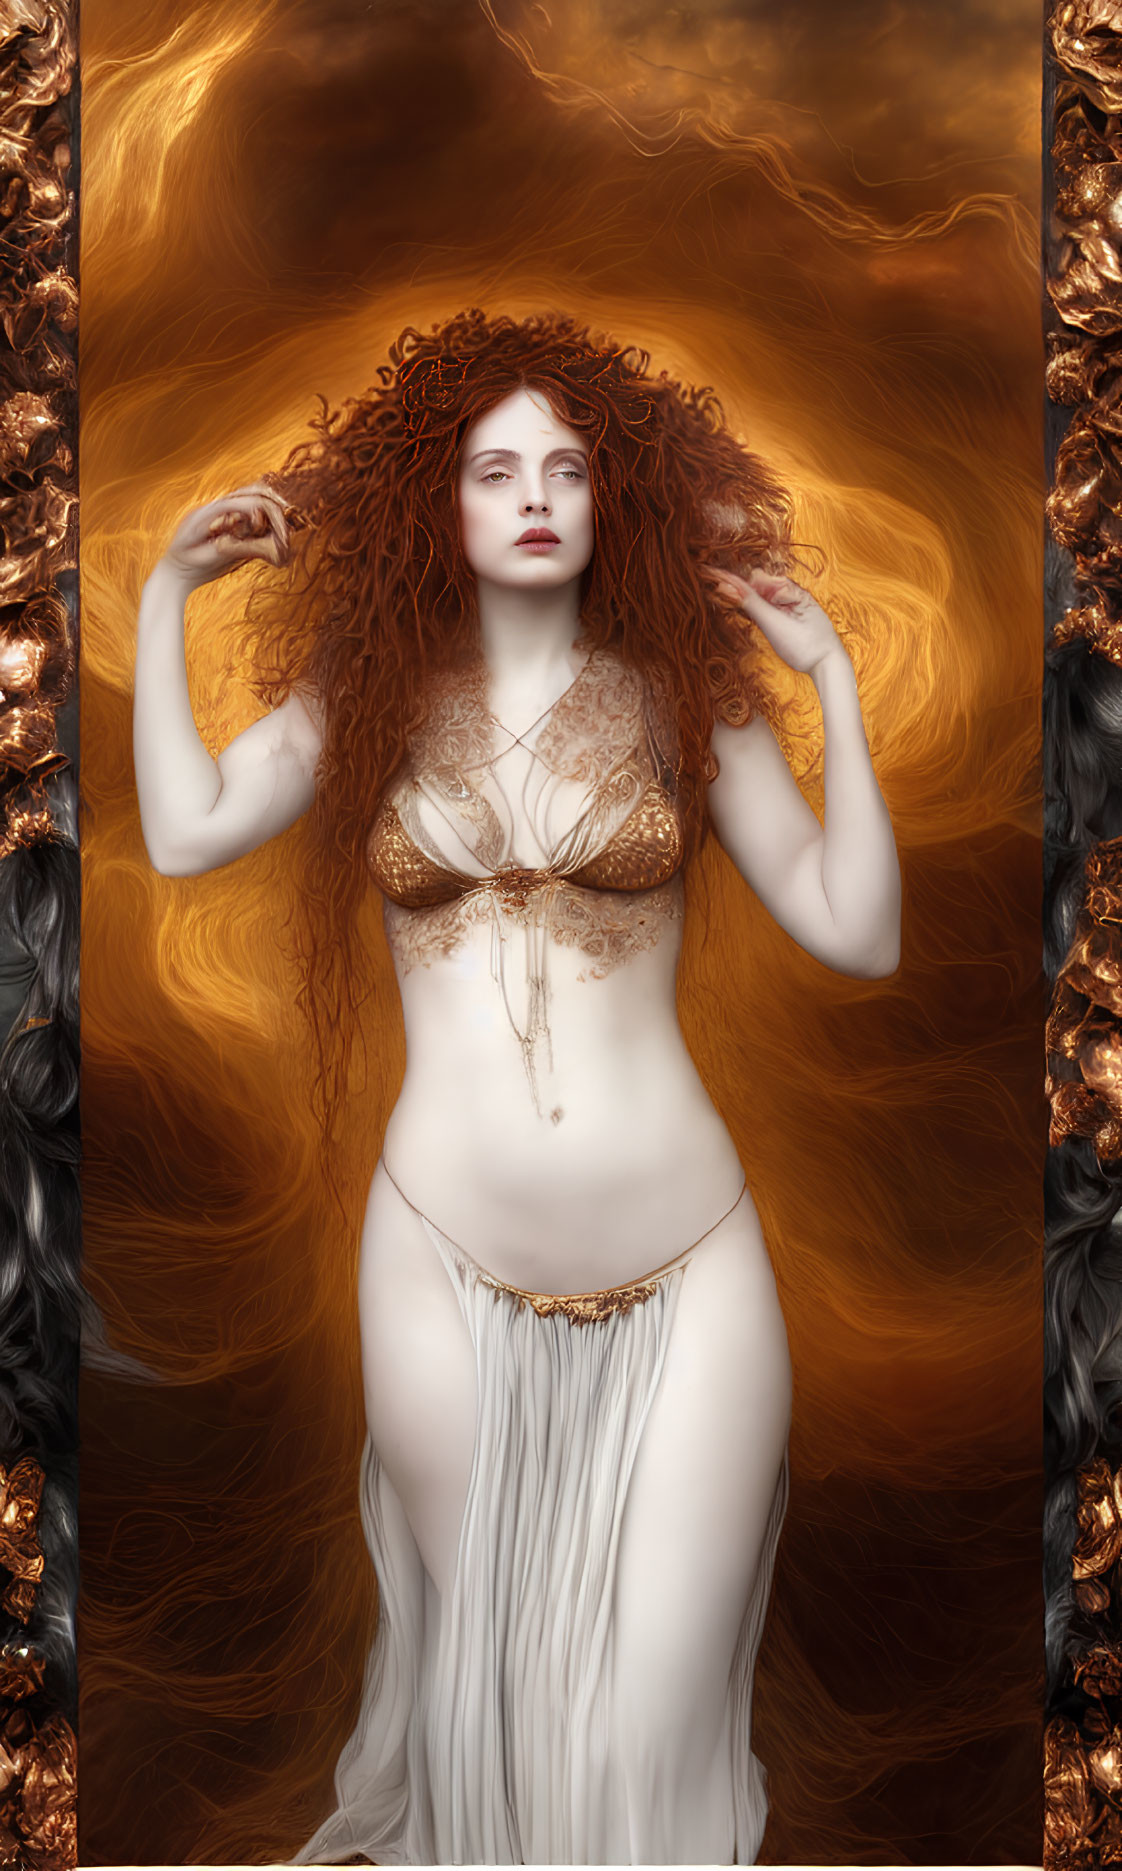 Digital artwork: Woman with red curly hair, golden bodice, white skirt, on swirling golden backdrop